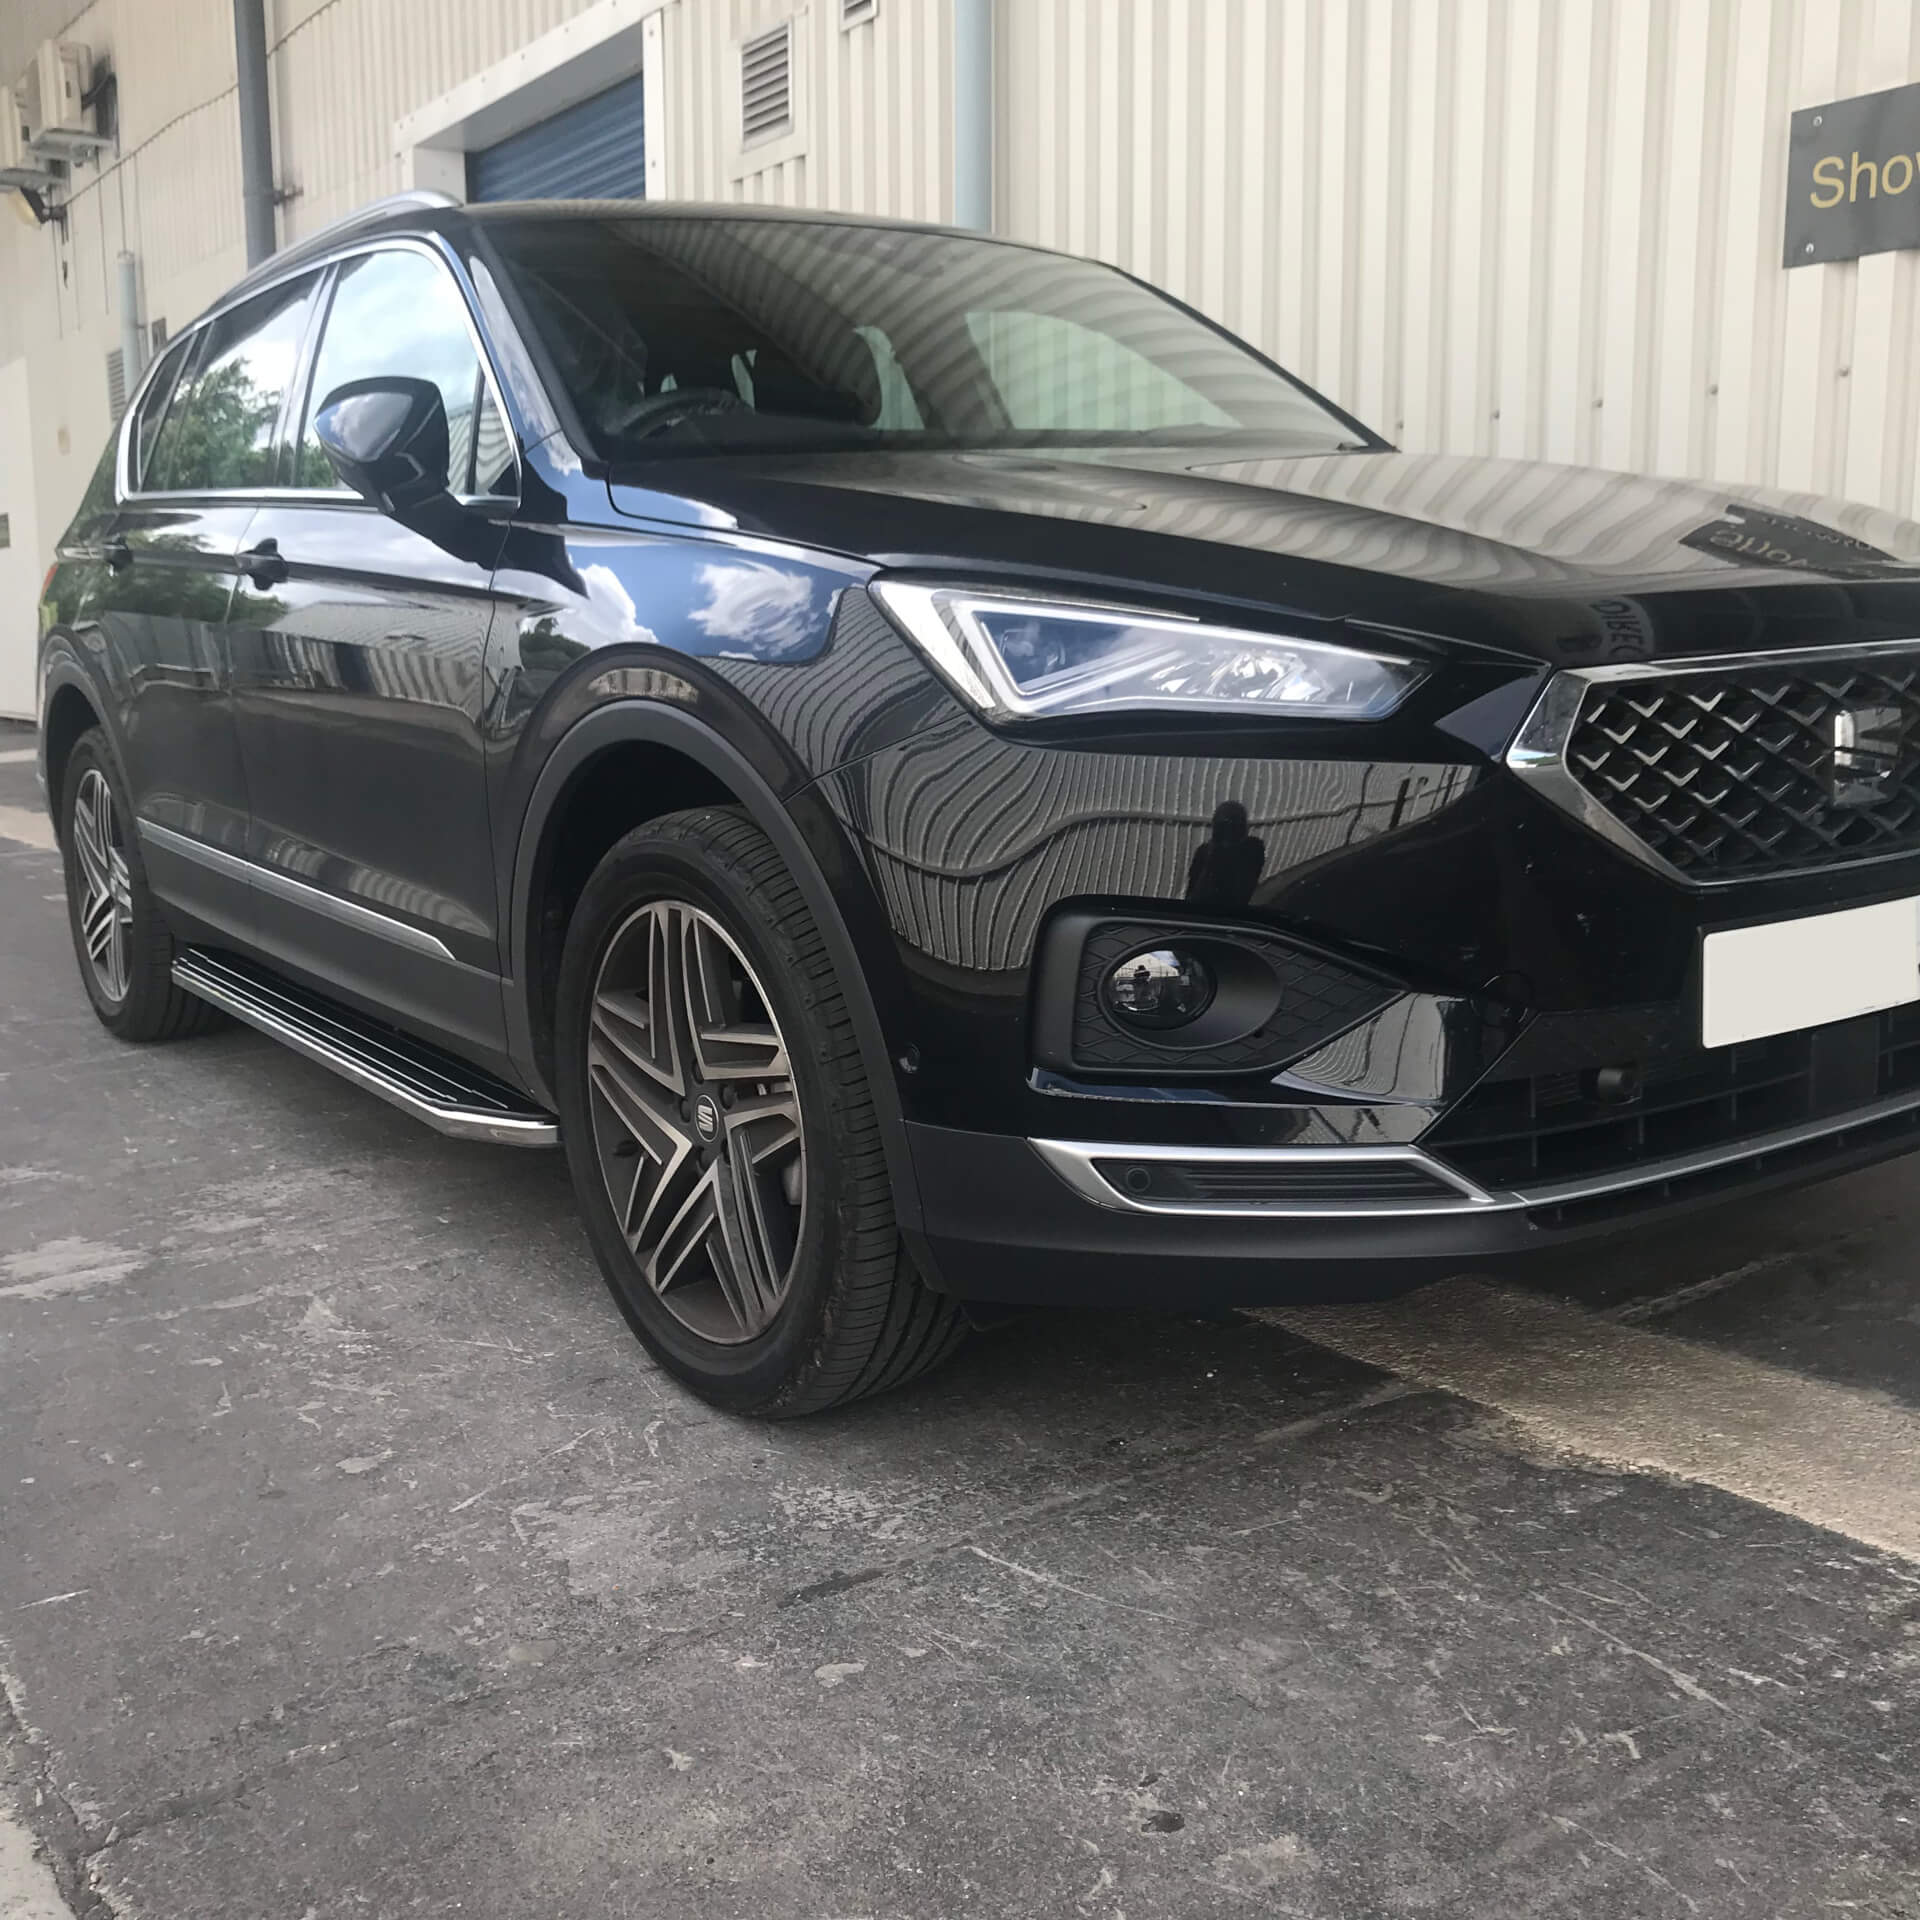 Direct4x4 accessories for Seat Tarraco vehicles with a photo of a black Seat Tarraco parked outside our depot fitted with raptor style side steps